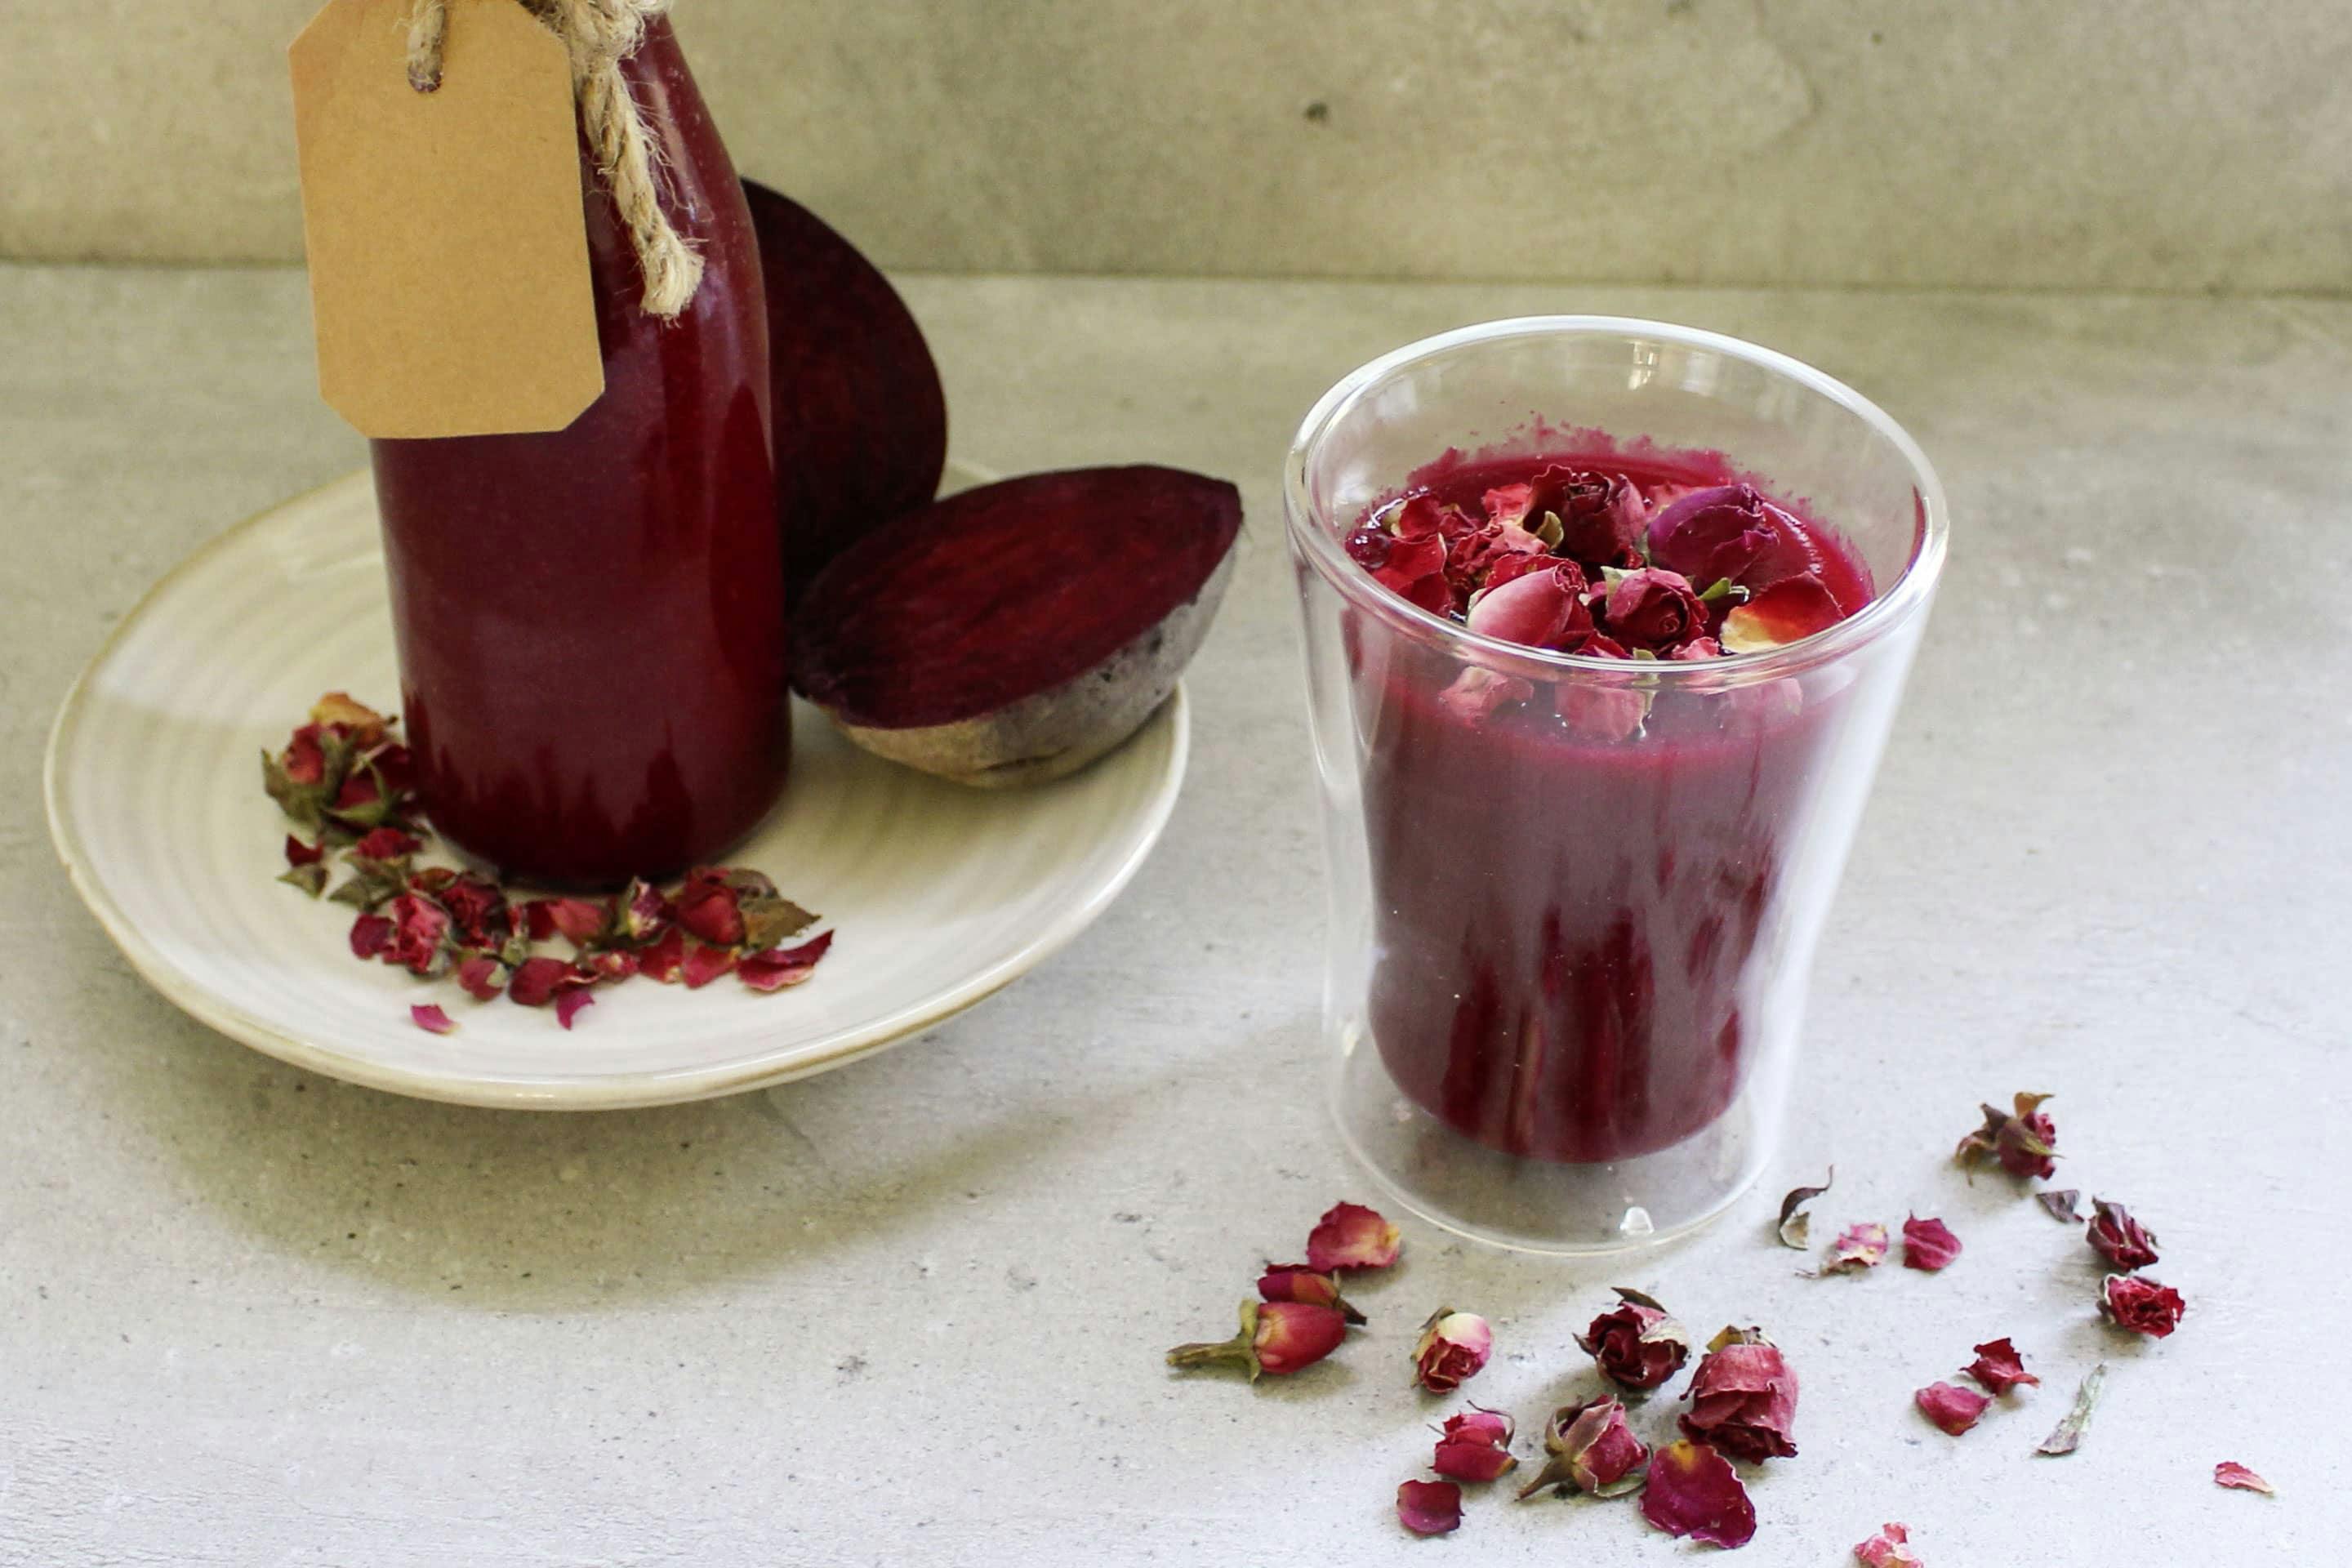 Beetroot smoothie with ground ginger in a glass garnished with rose petals